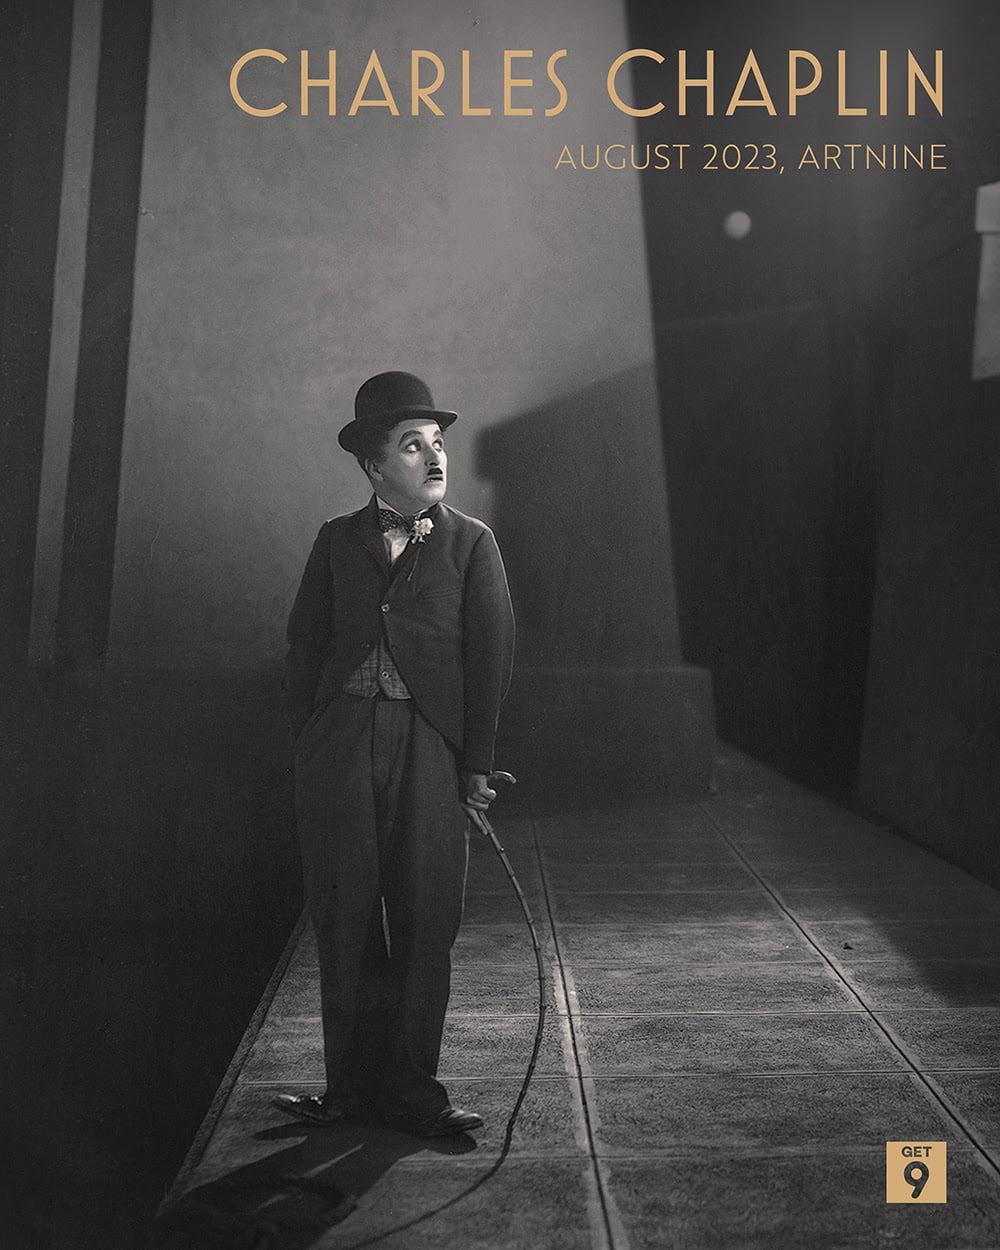 Actor Charlie Chaplin special exhibition, screening of 10 films 'City Lights' → 'Modern Times'